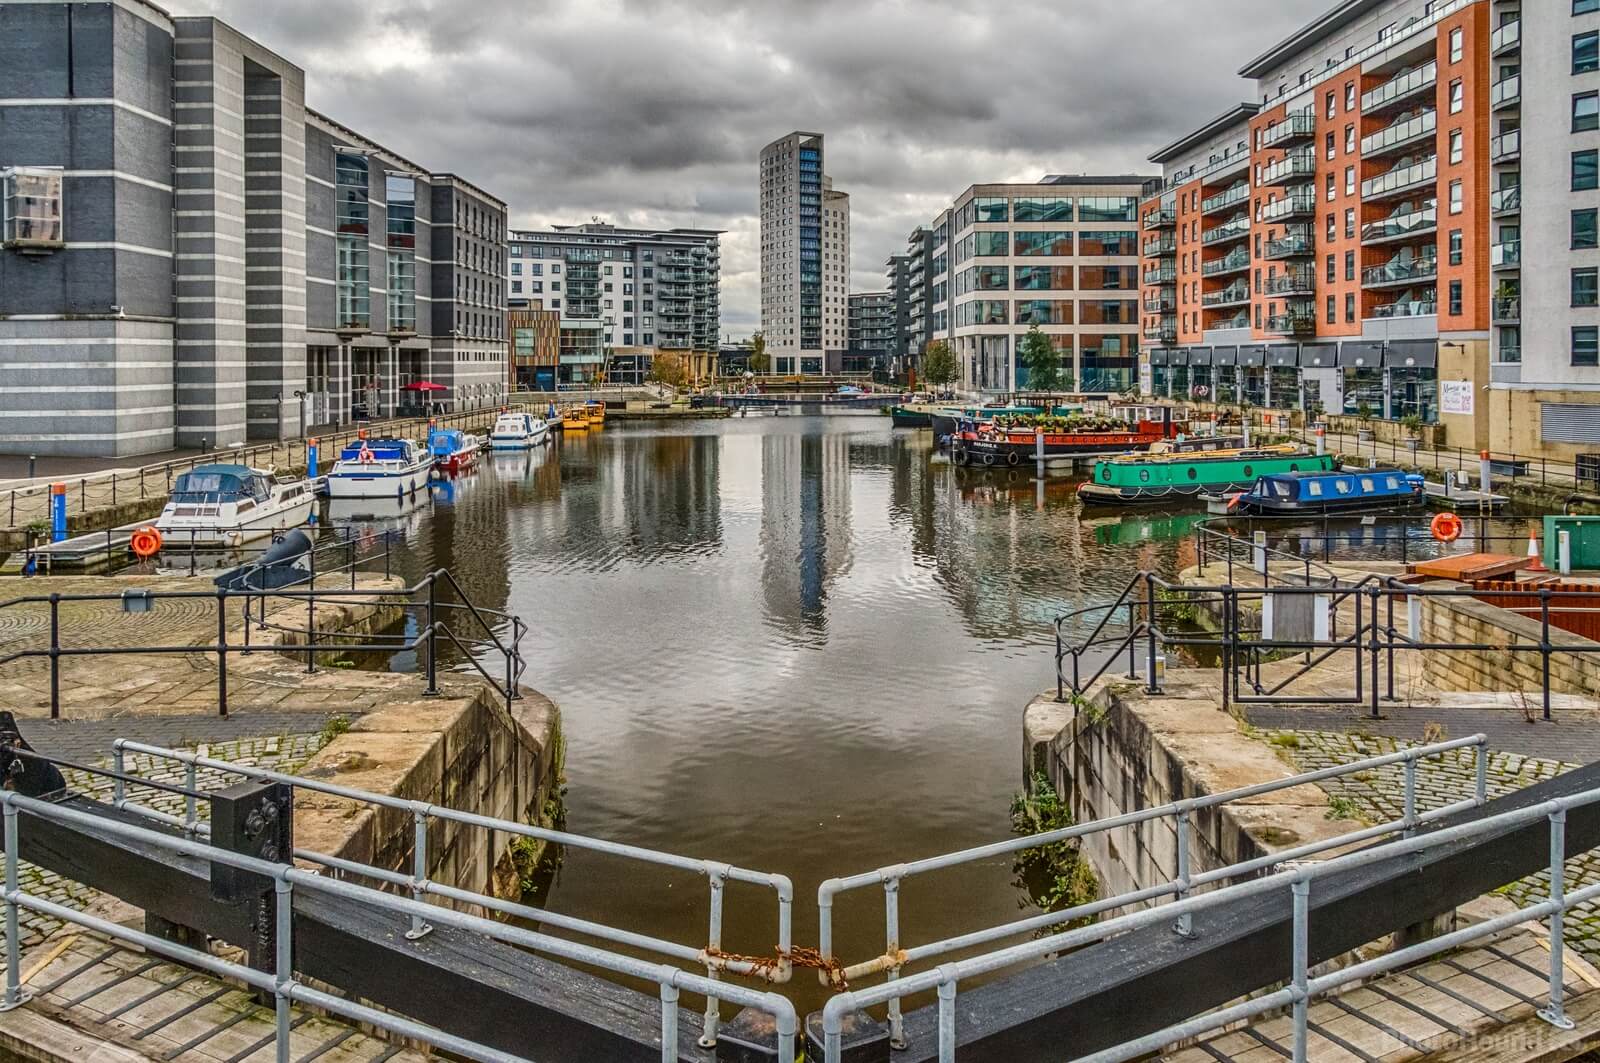 Image of Leeds Dock by Andy Killingbeck